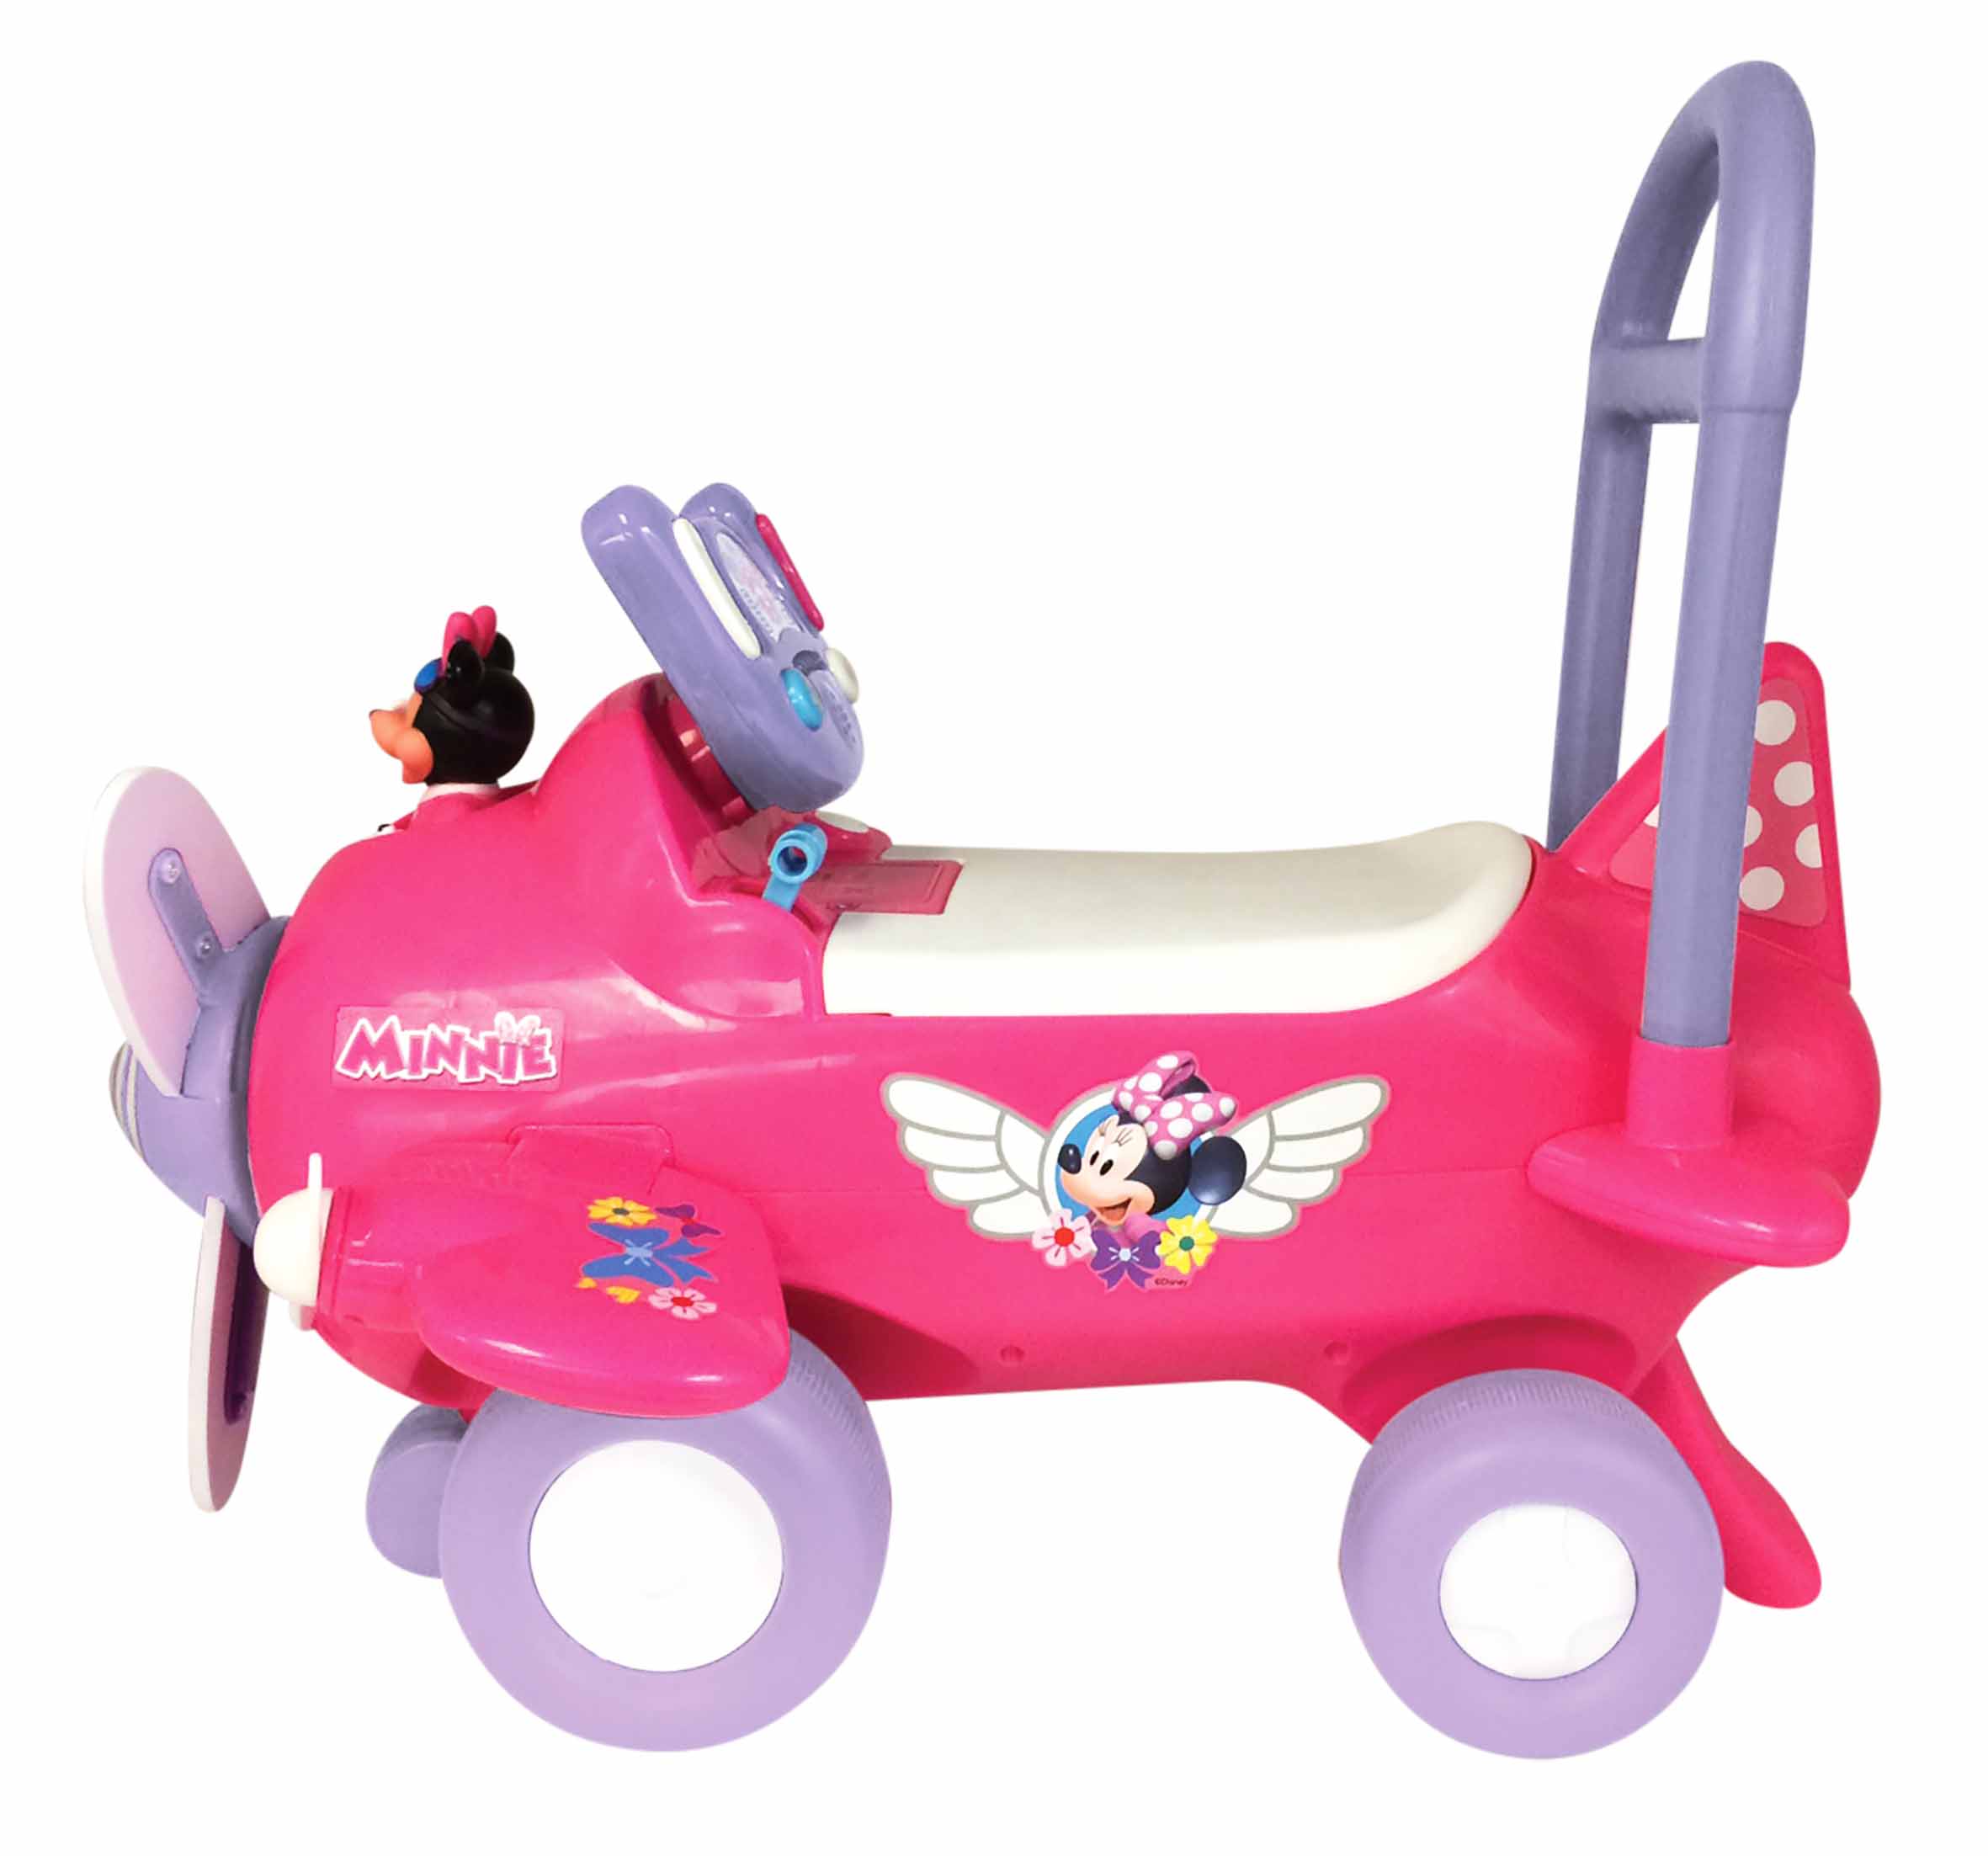 Disney Deluxe Minnie Mouse Plane Activity Ride-on with Lights and Sounds - image 4 of 8